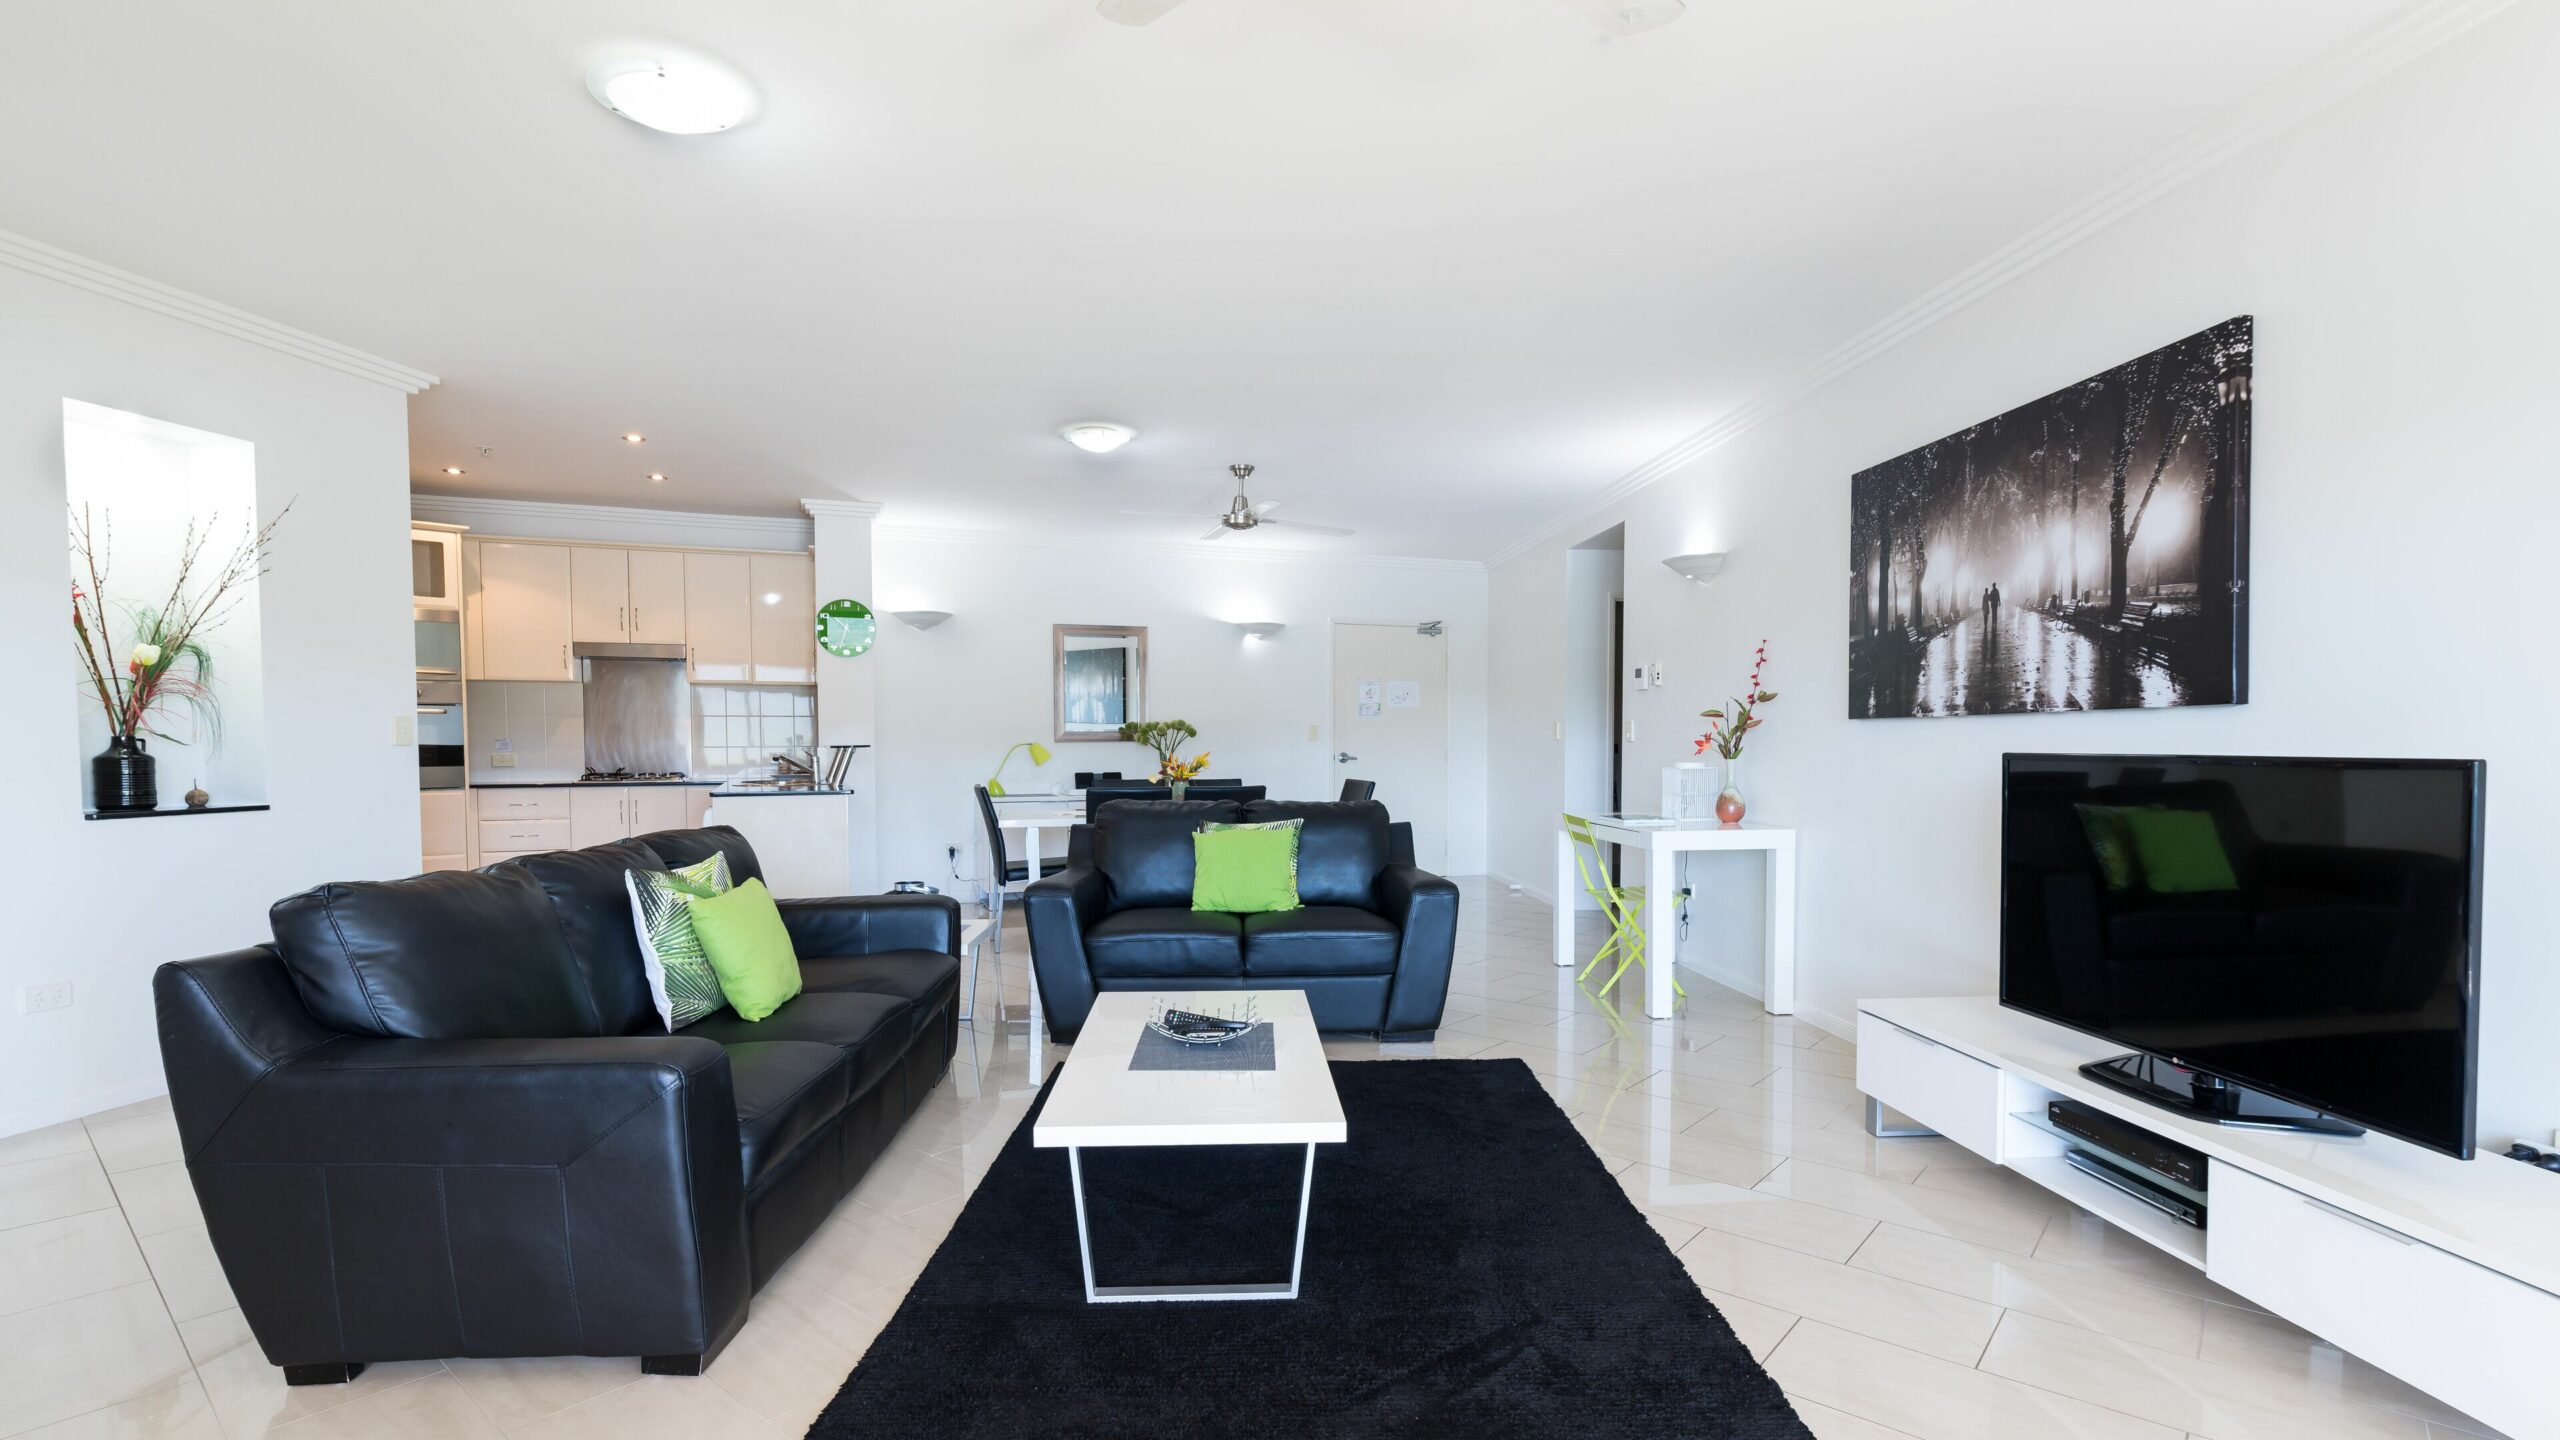 3 Bedroom Apartment in Cairns CBD with Stunning Water Views